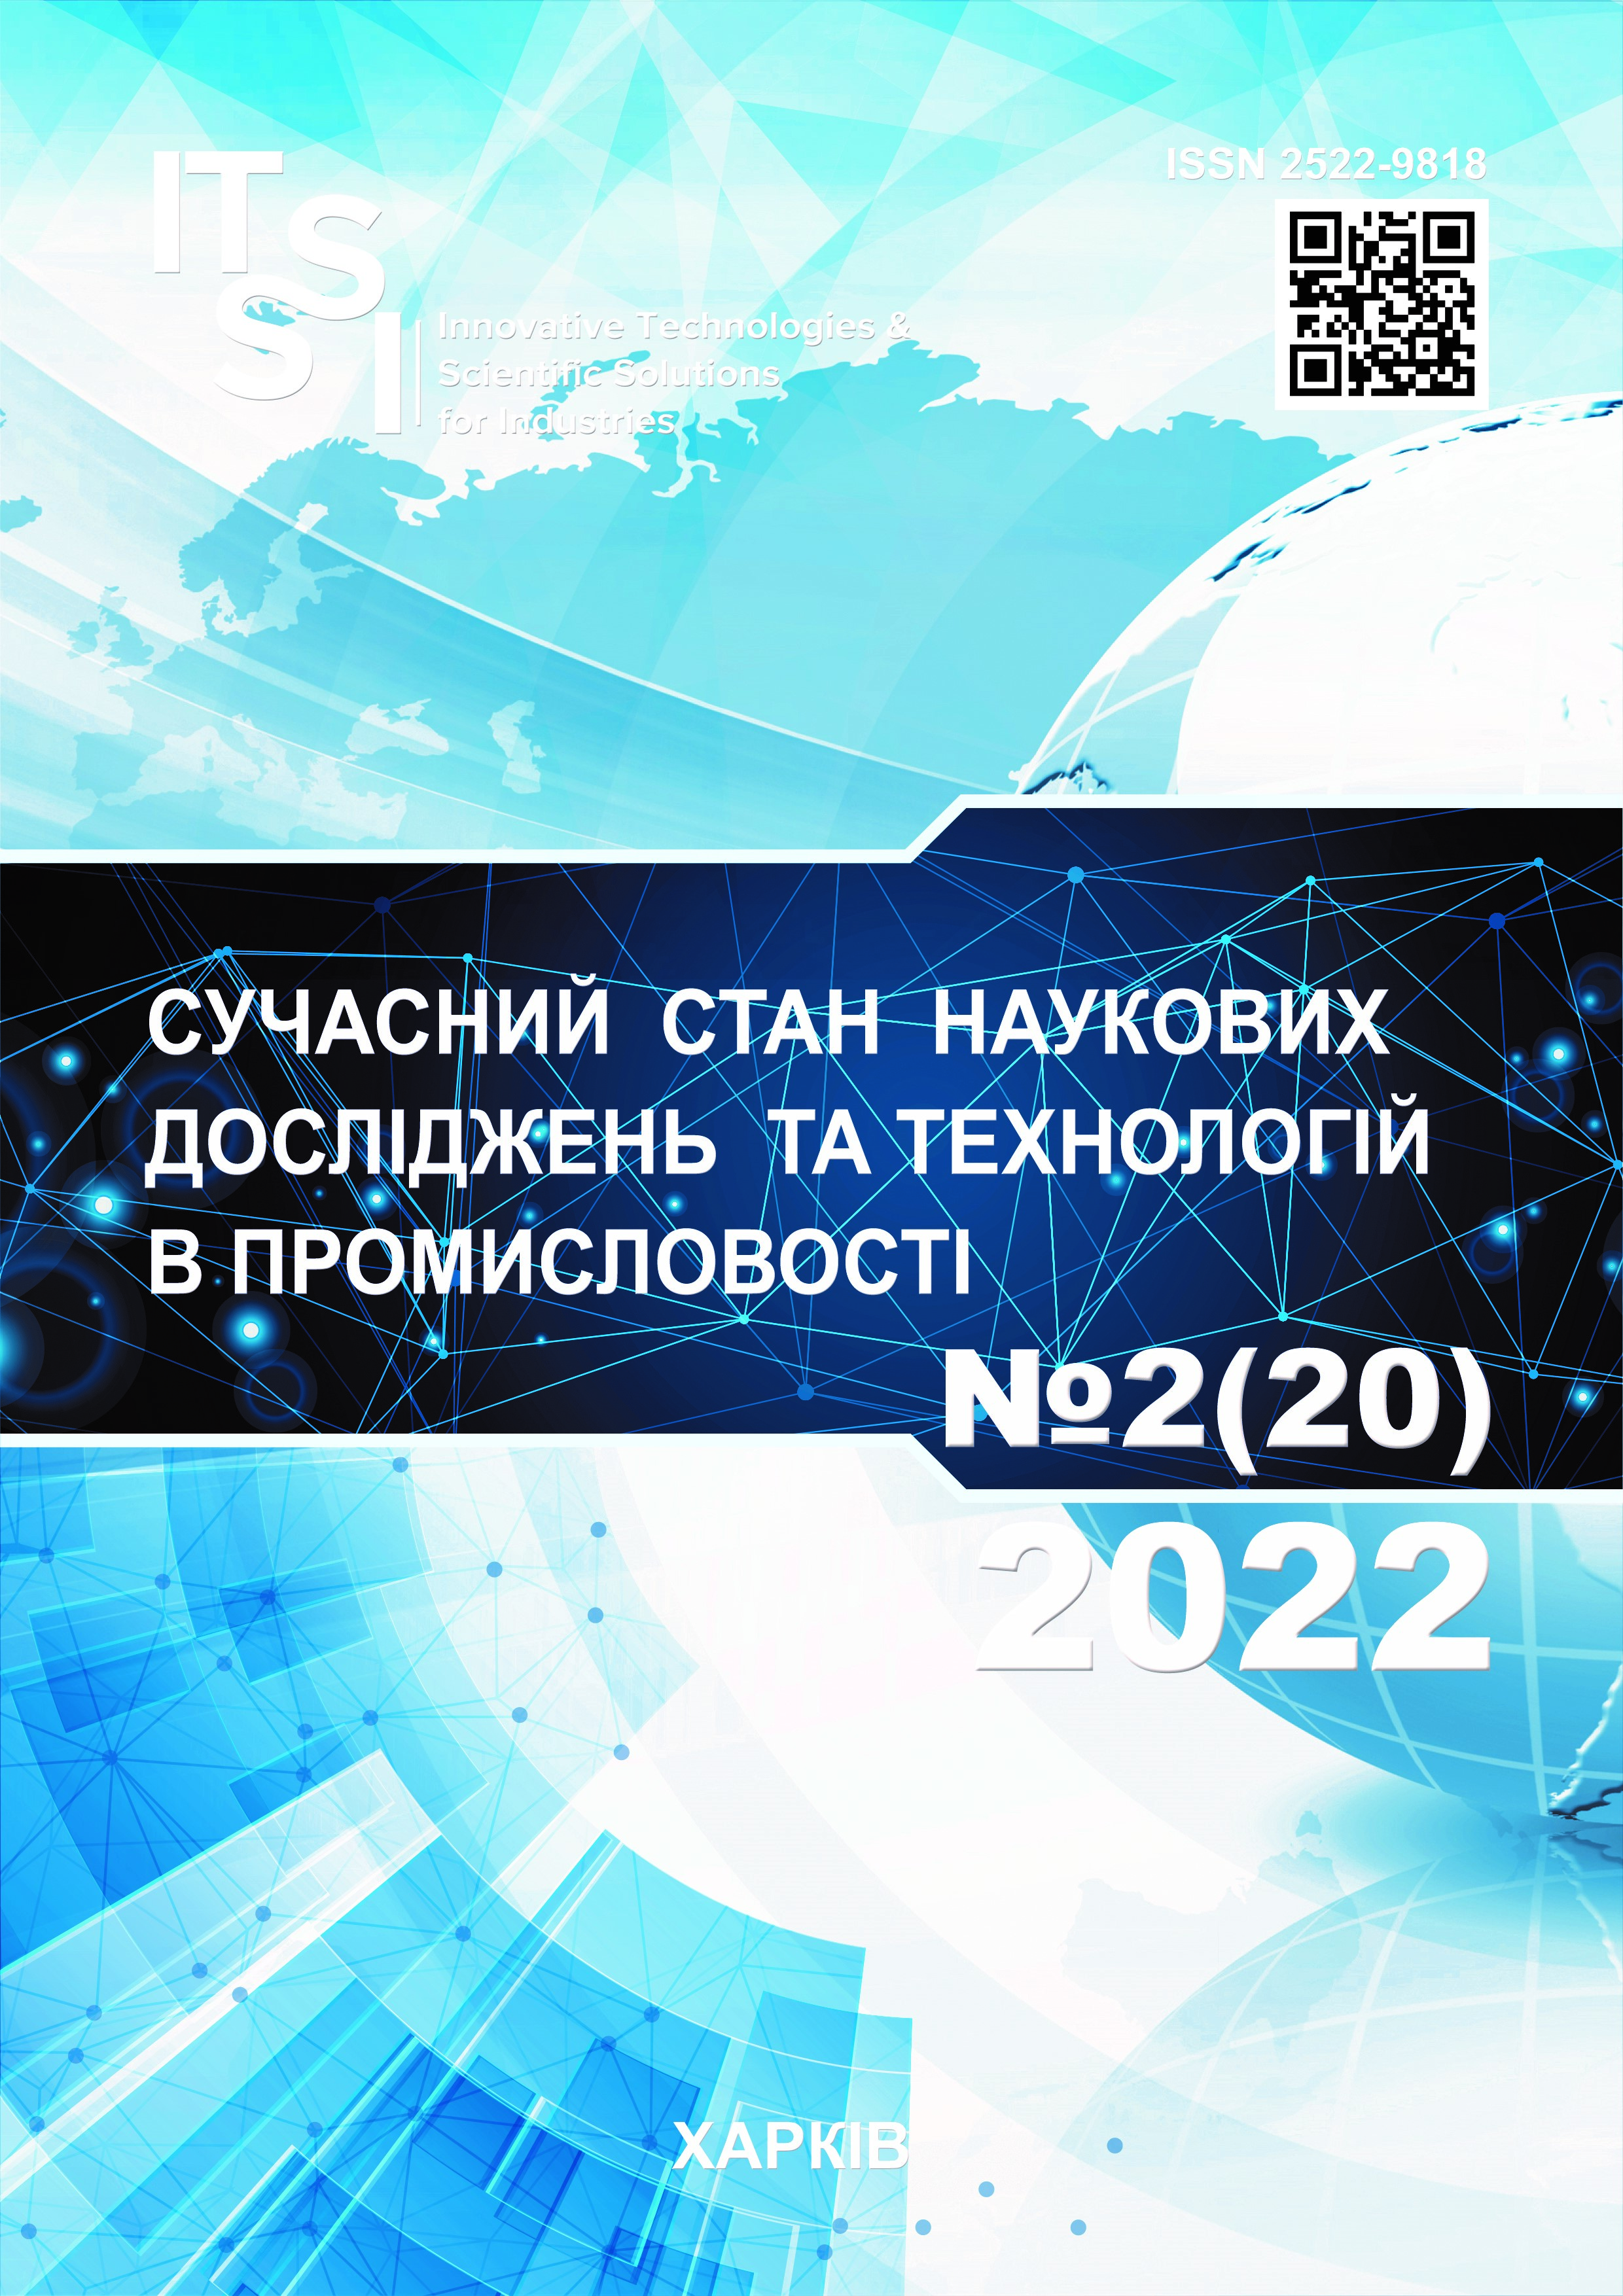 					View No. 2 (20) (2022): INNOVATIVE  TECHNOLOGIES  AND  SCIENTIFIC SOLUTIONS FOR INDUSTRIES
				